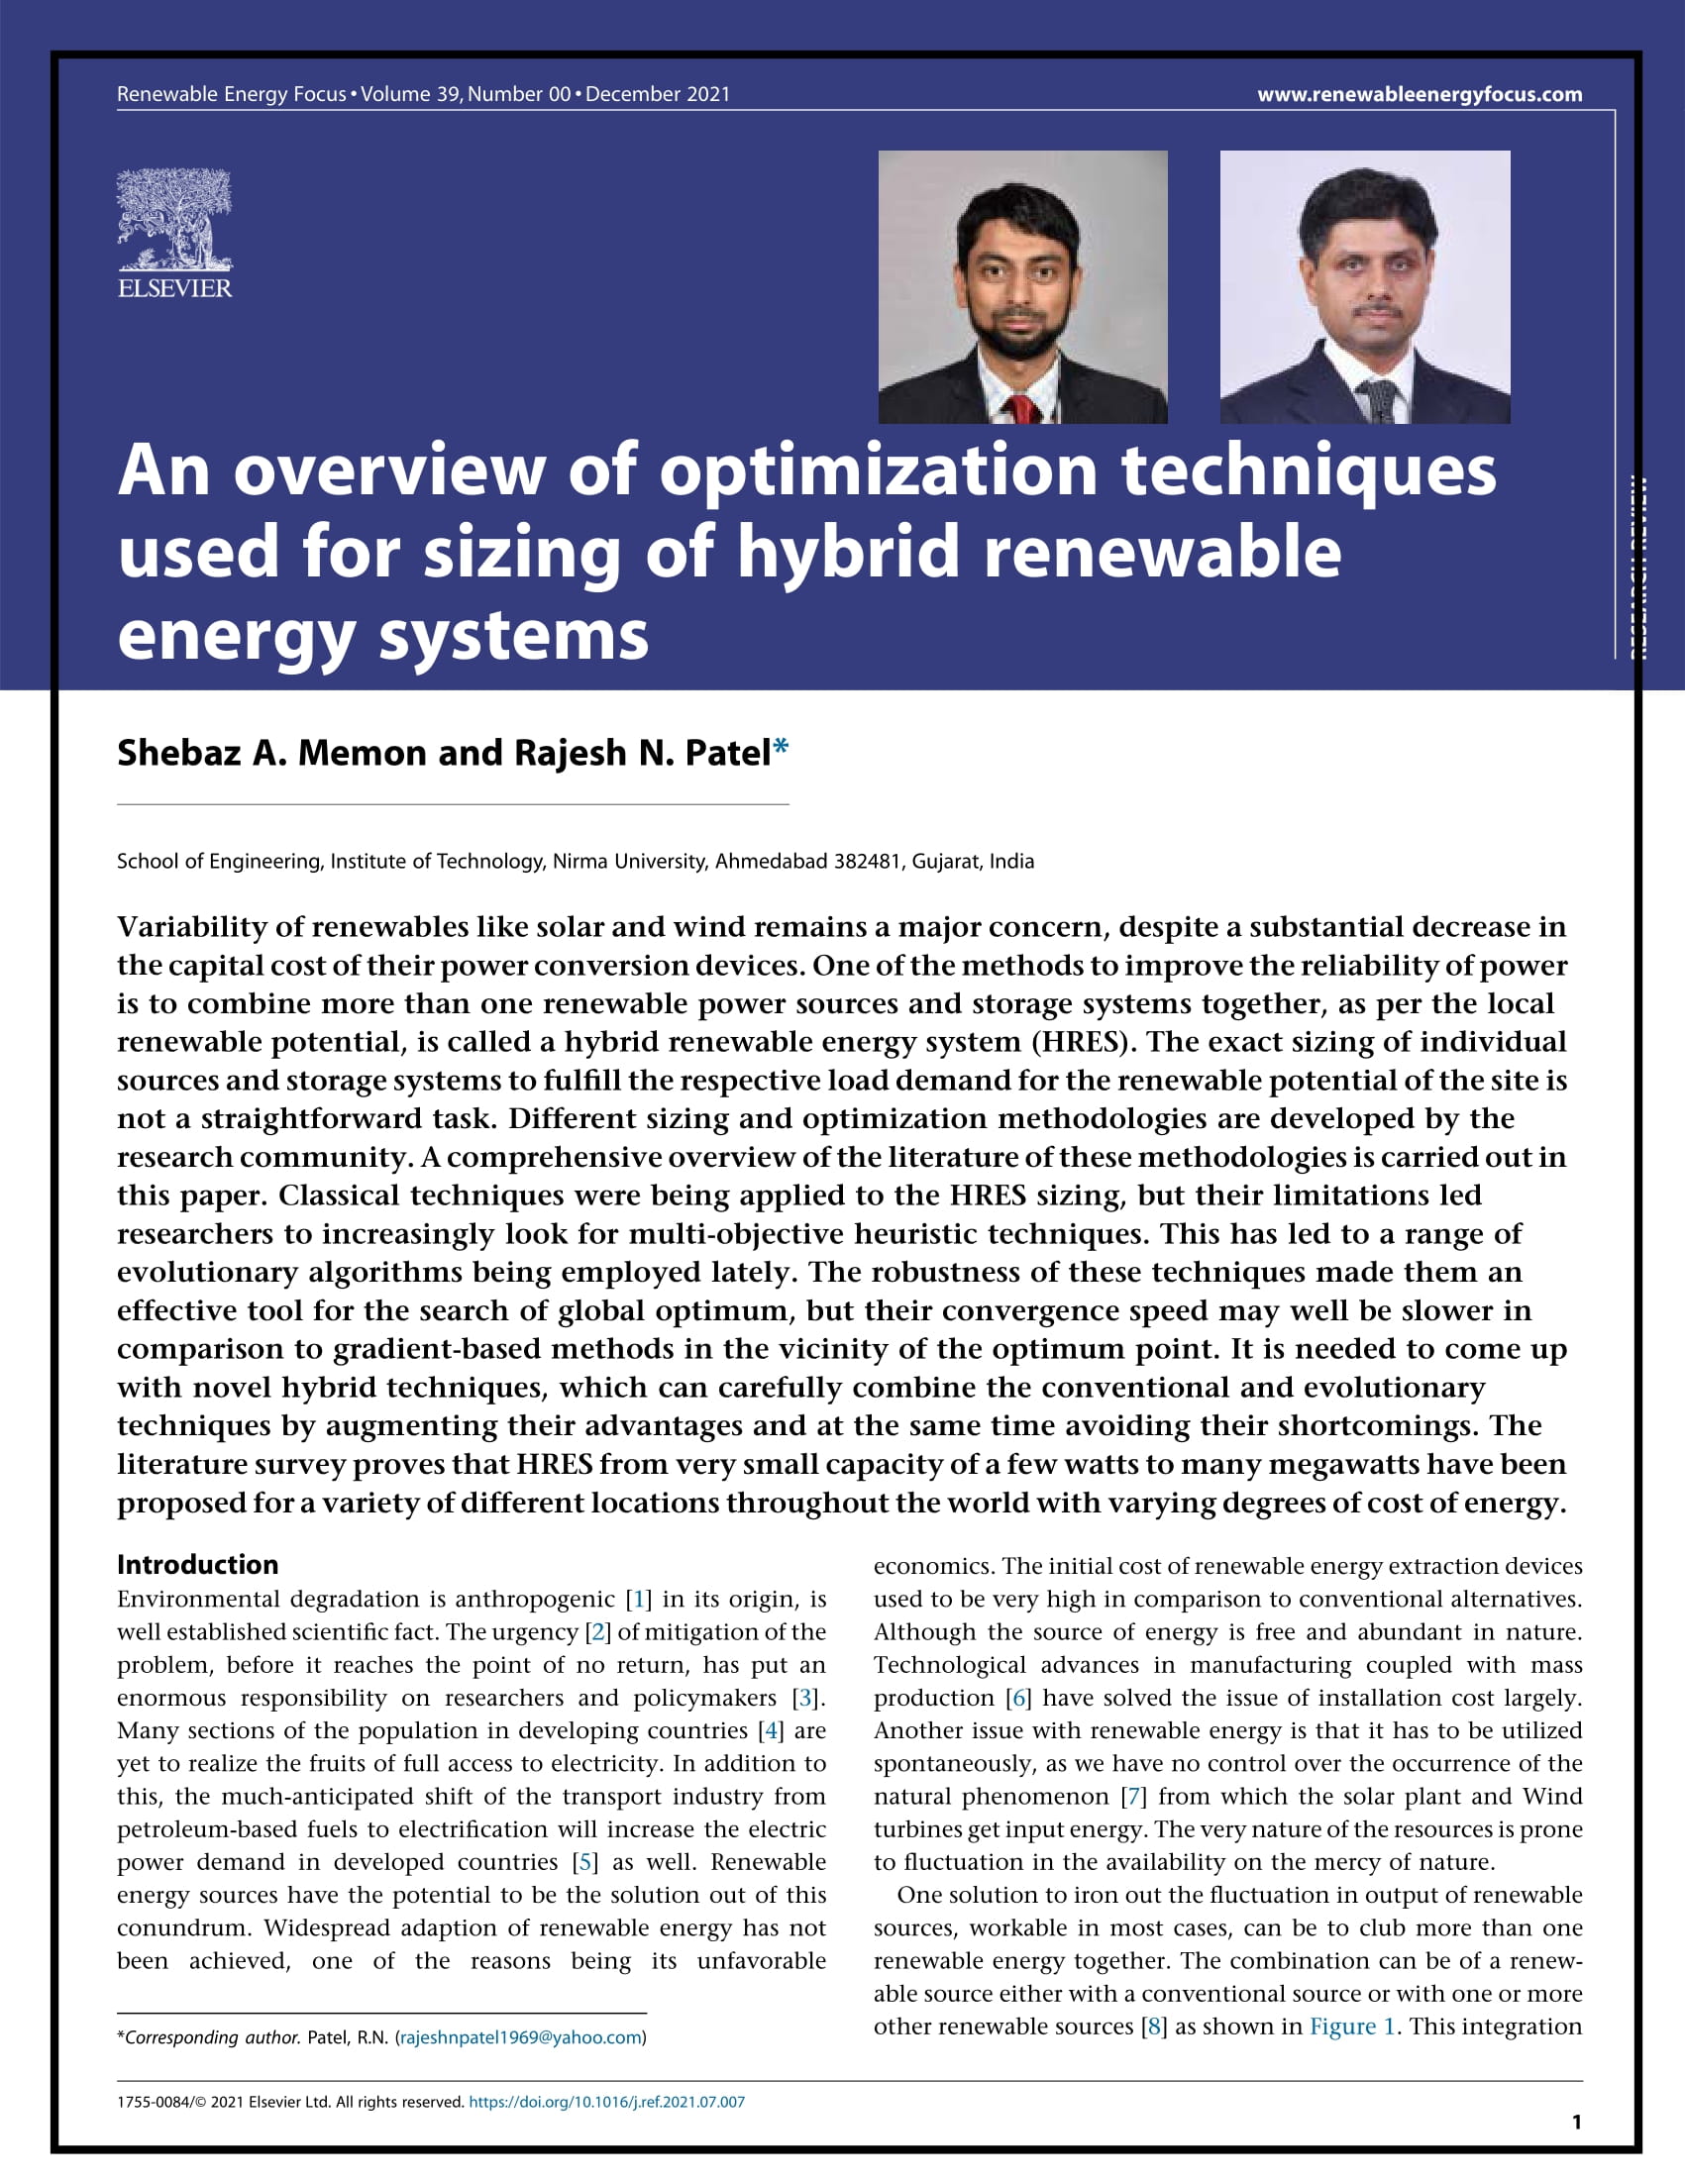 An overview of optimization techniques used for sizing of hybrid renewable energy systems